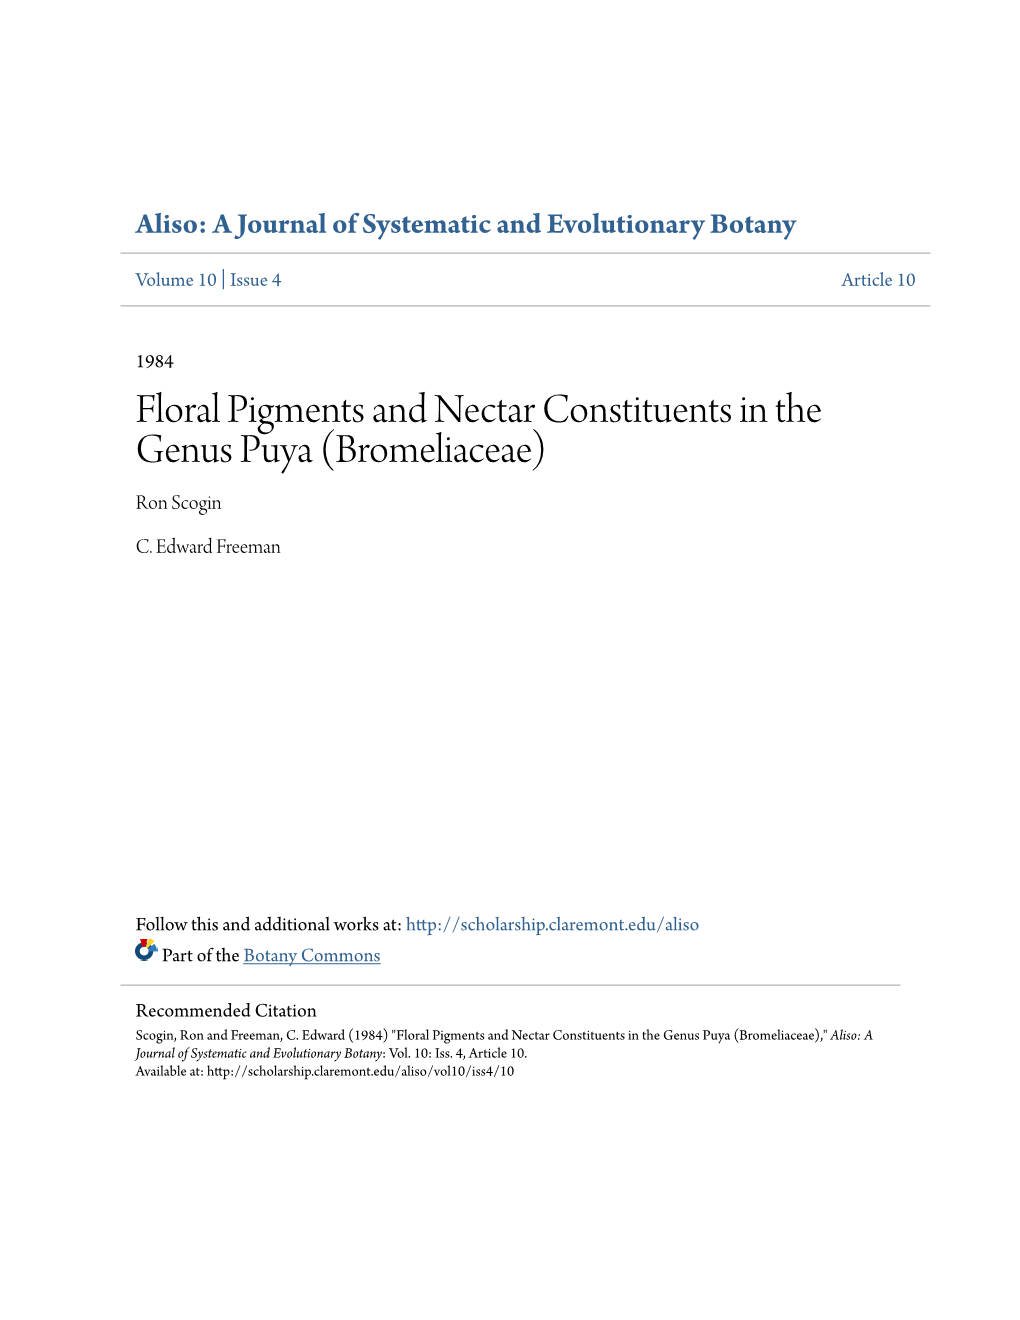 Floral Pigments and Nectar Constituents in the Genus Puya (Bromeliaceae) Ron Scogin